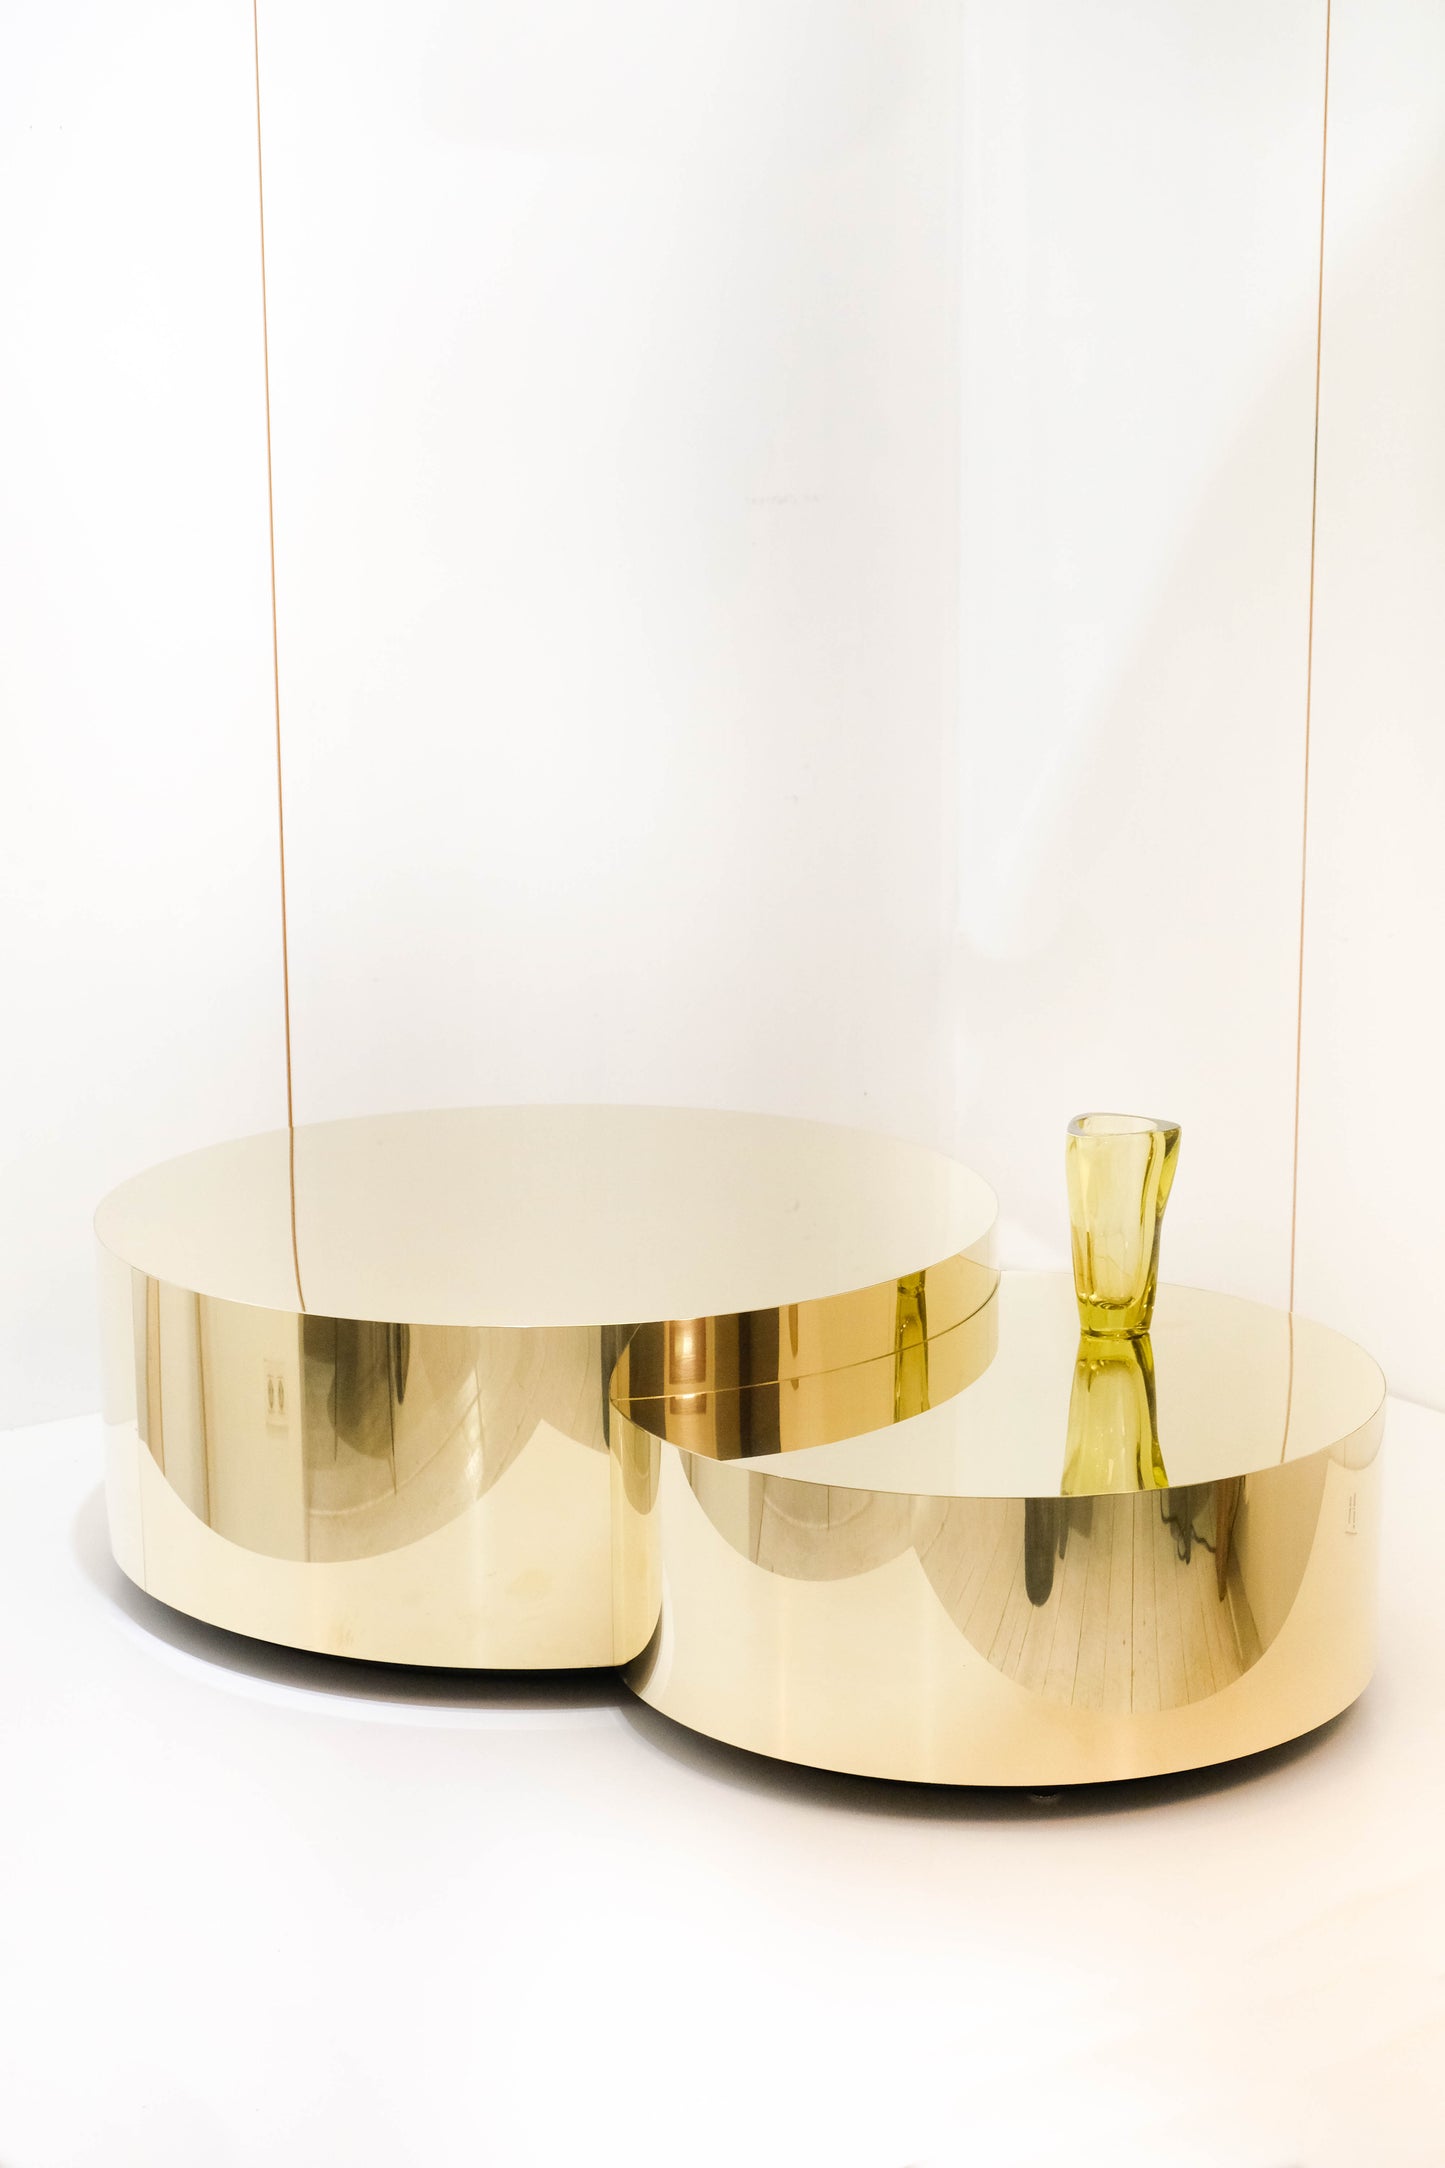 Luna Brass/Steel Tables Set - Fully Customizable Auxiliary Tables